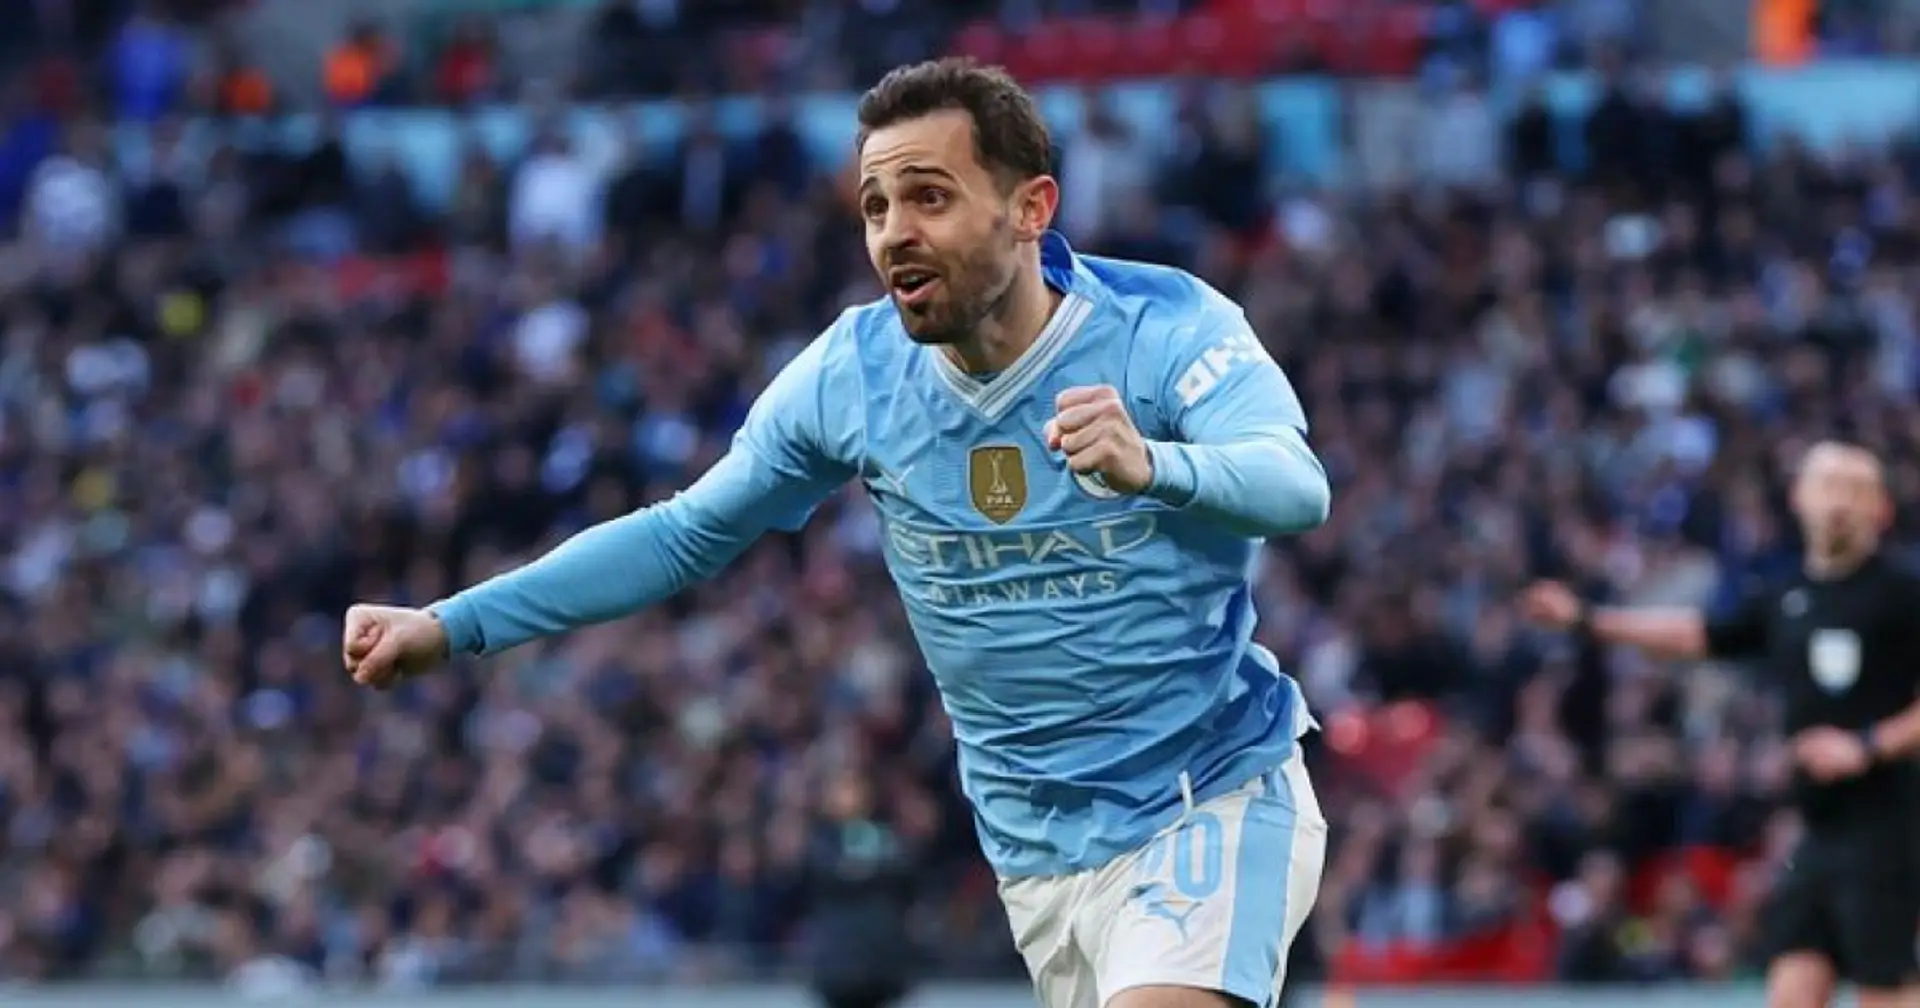 'If you play for City you play every three days': Bernardo Silva finds positive moment in tough Man City schedule